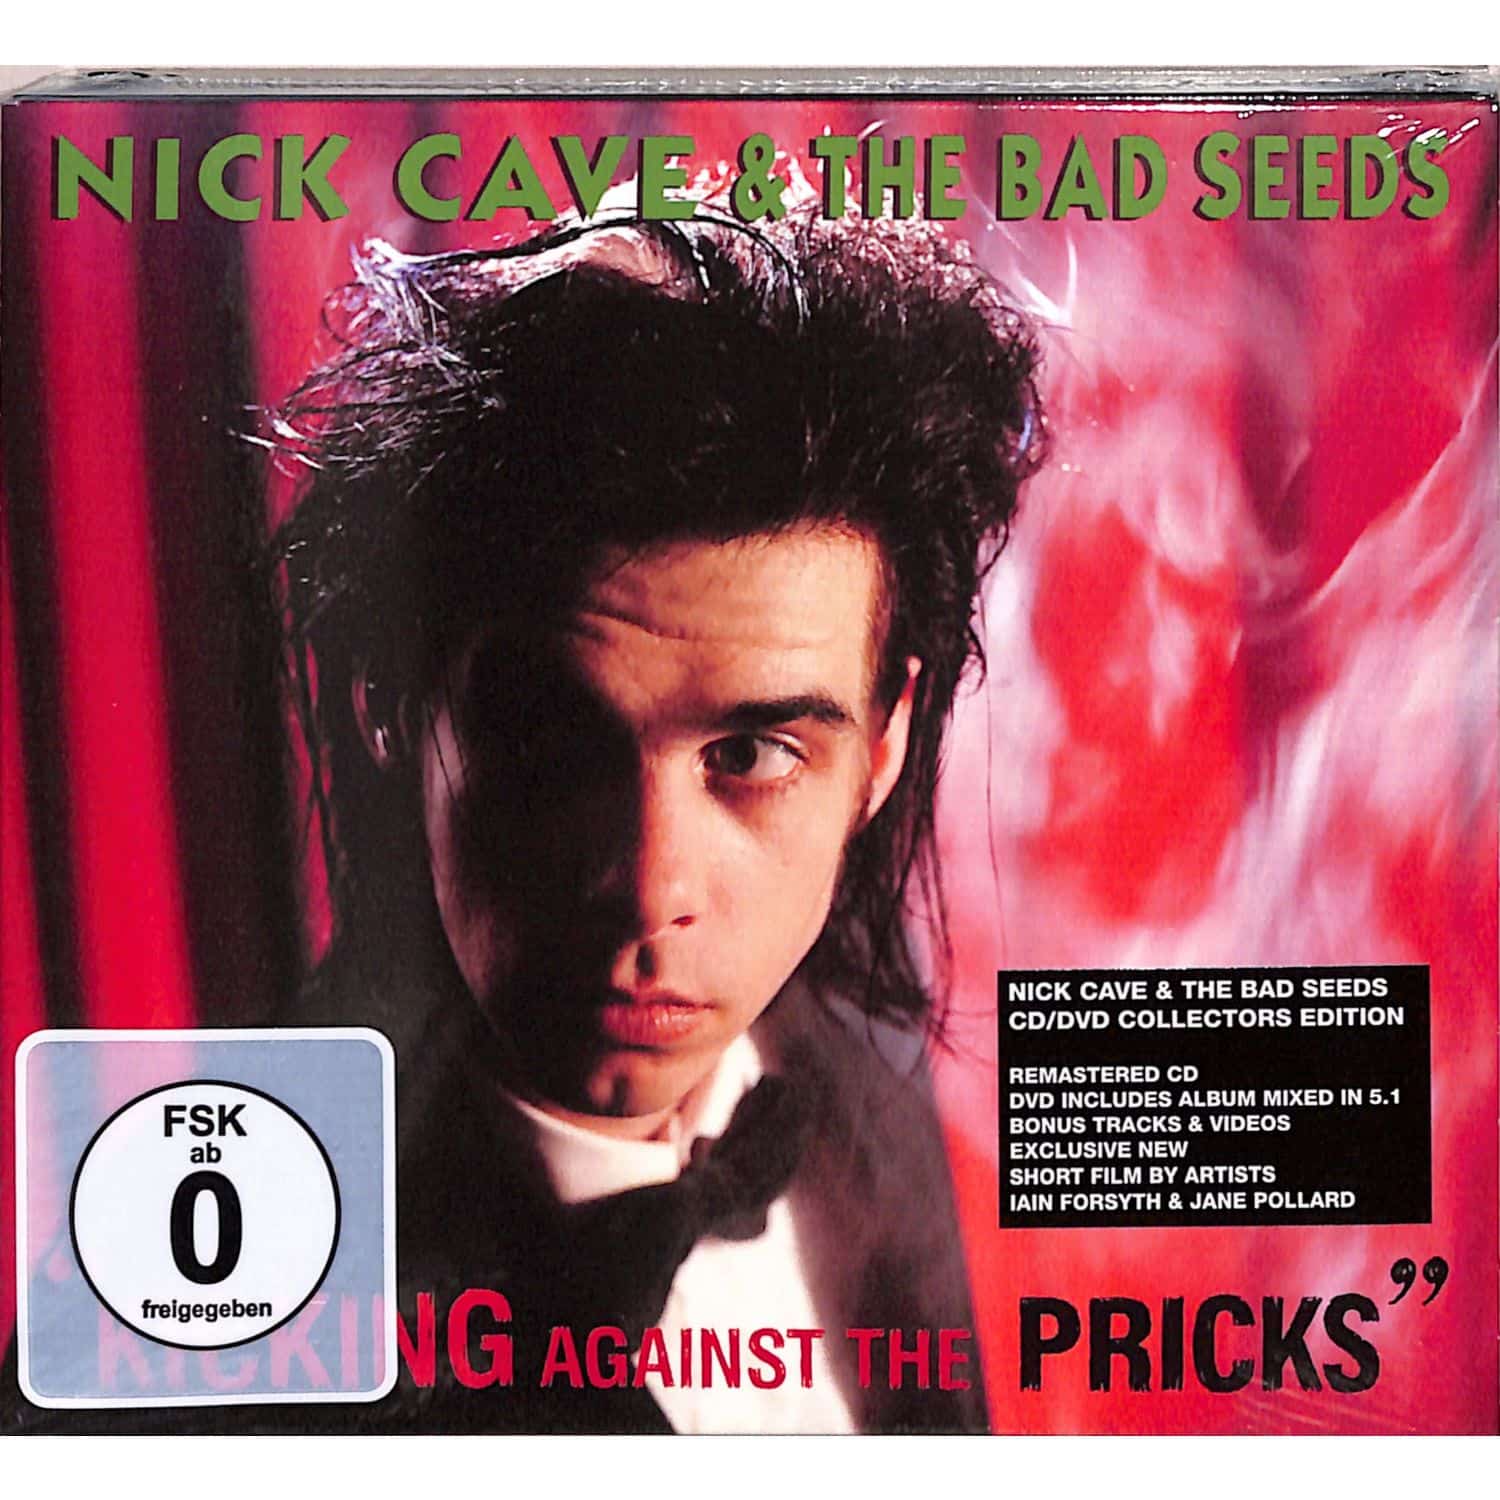 Nick Cave & The Bad Seeds - KICKING AGAINST THE PRICKS 